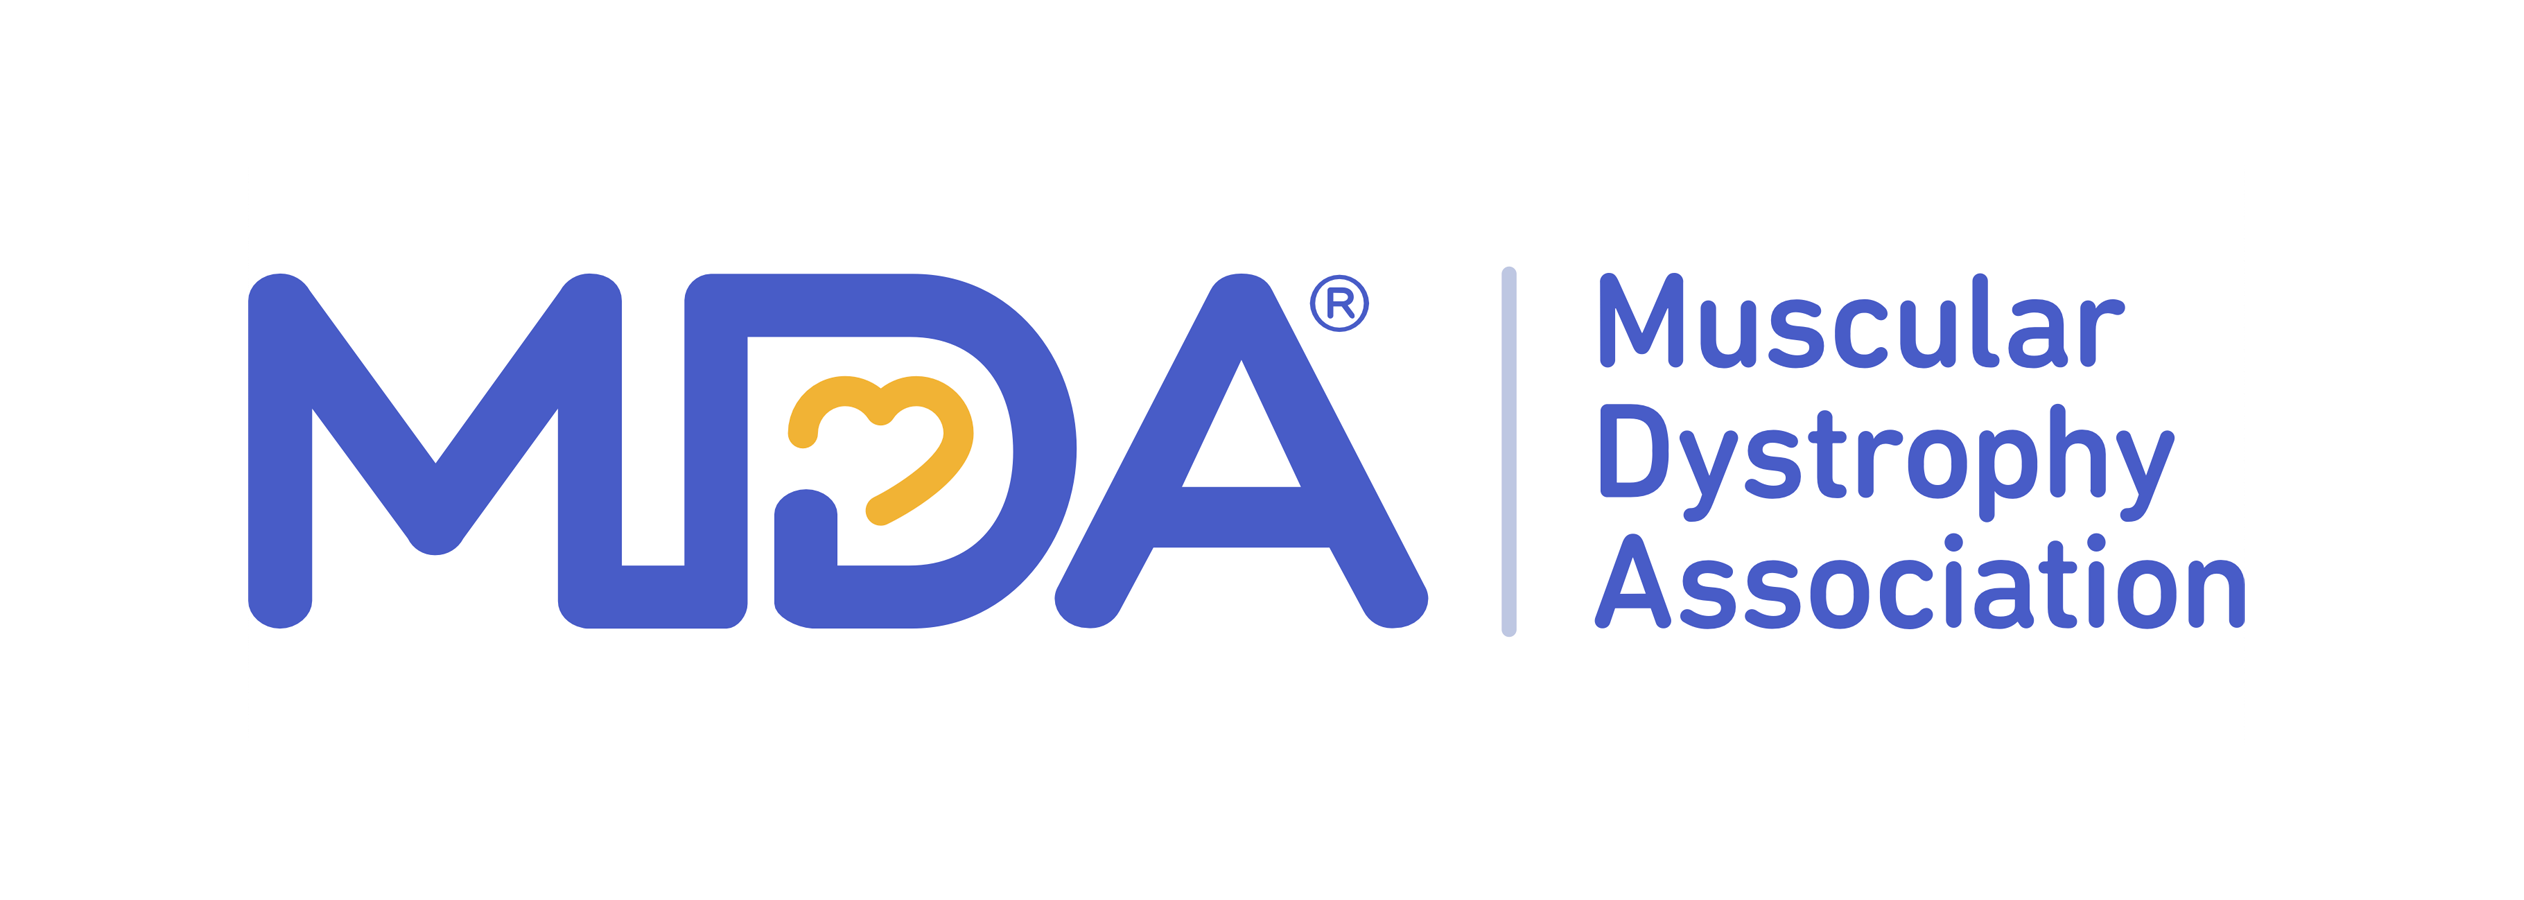 GPM INVESTMENTS, LLC LAUNCHES HOLIDAY RETAIL CAMPAIGN FOR THE MUSCULAR DYSTROPHY ASSOCIATION (MDA) IN 27 STATES